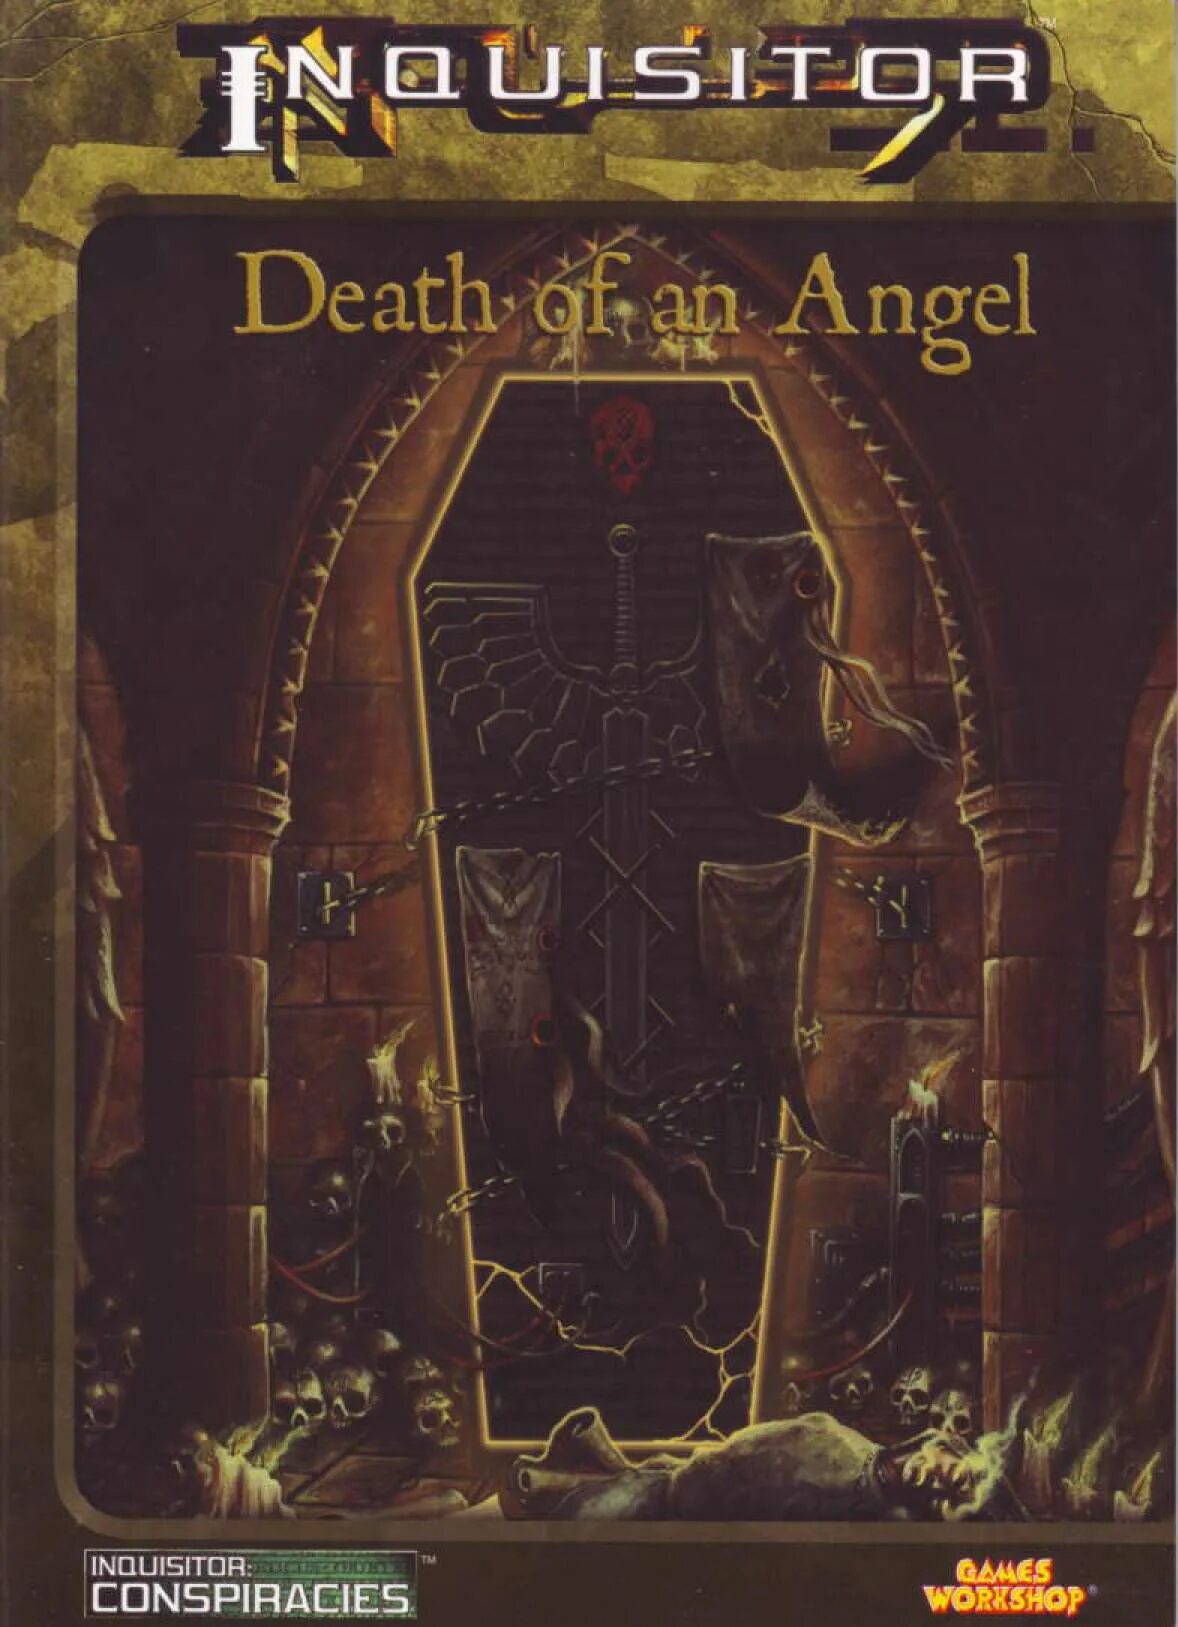 Inquisitor Conspiracies 2 - Death of an Angel. Conspiracy in Death. Ангел разрушения книга. Вархаммер книга Death of a Silversmith.